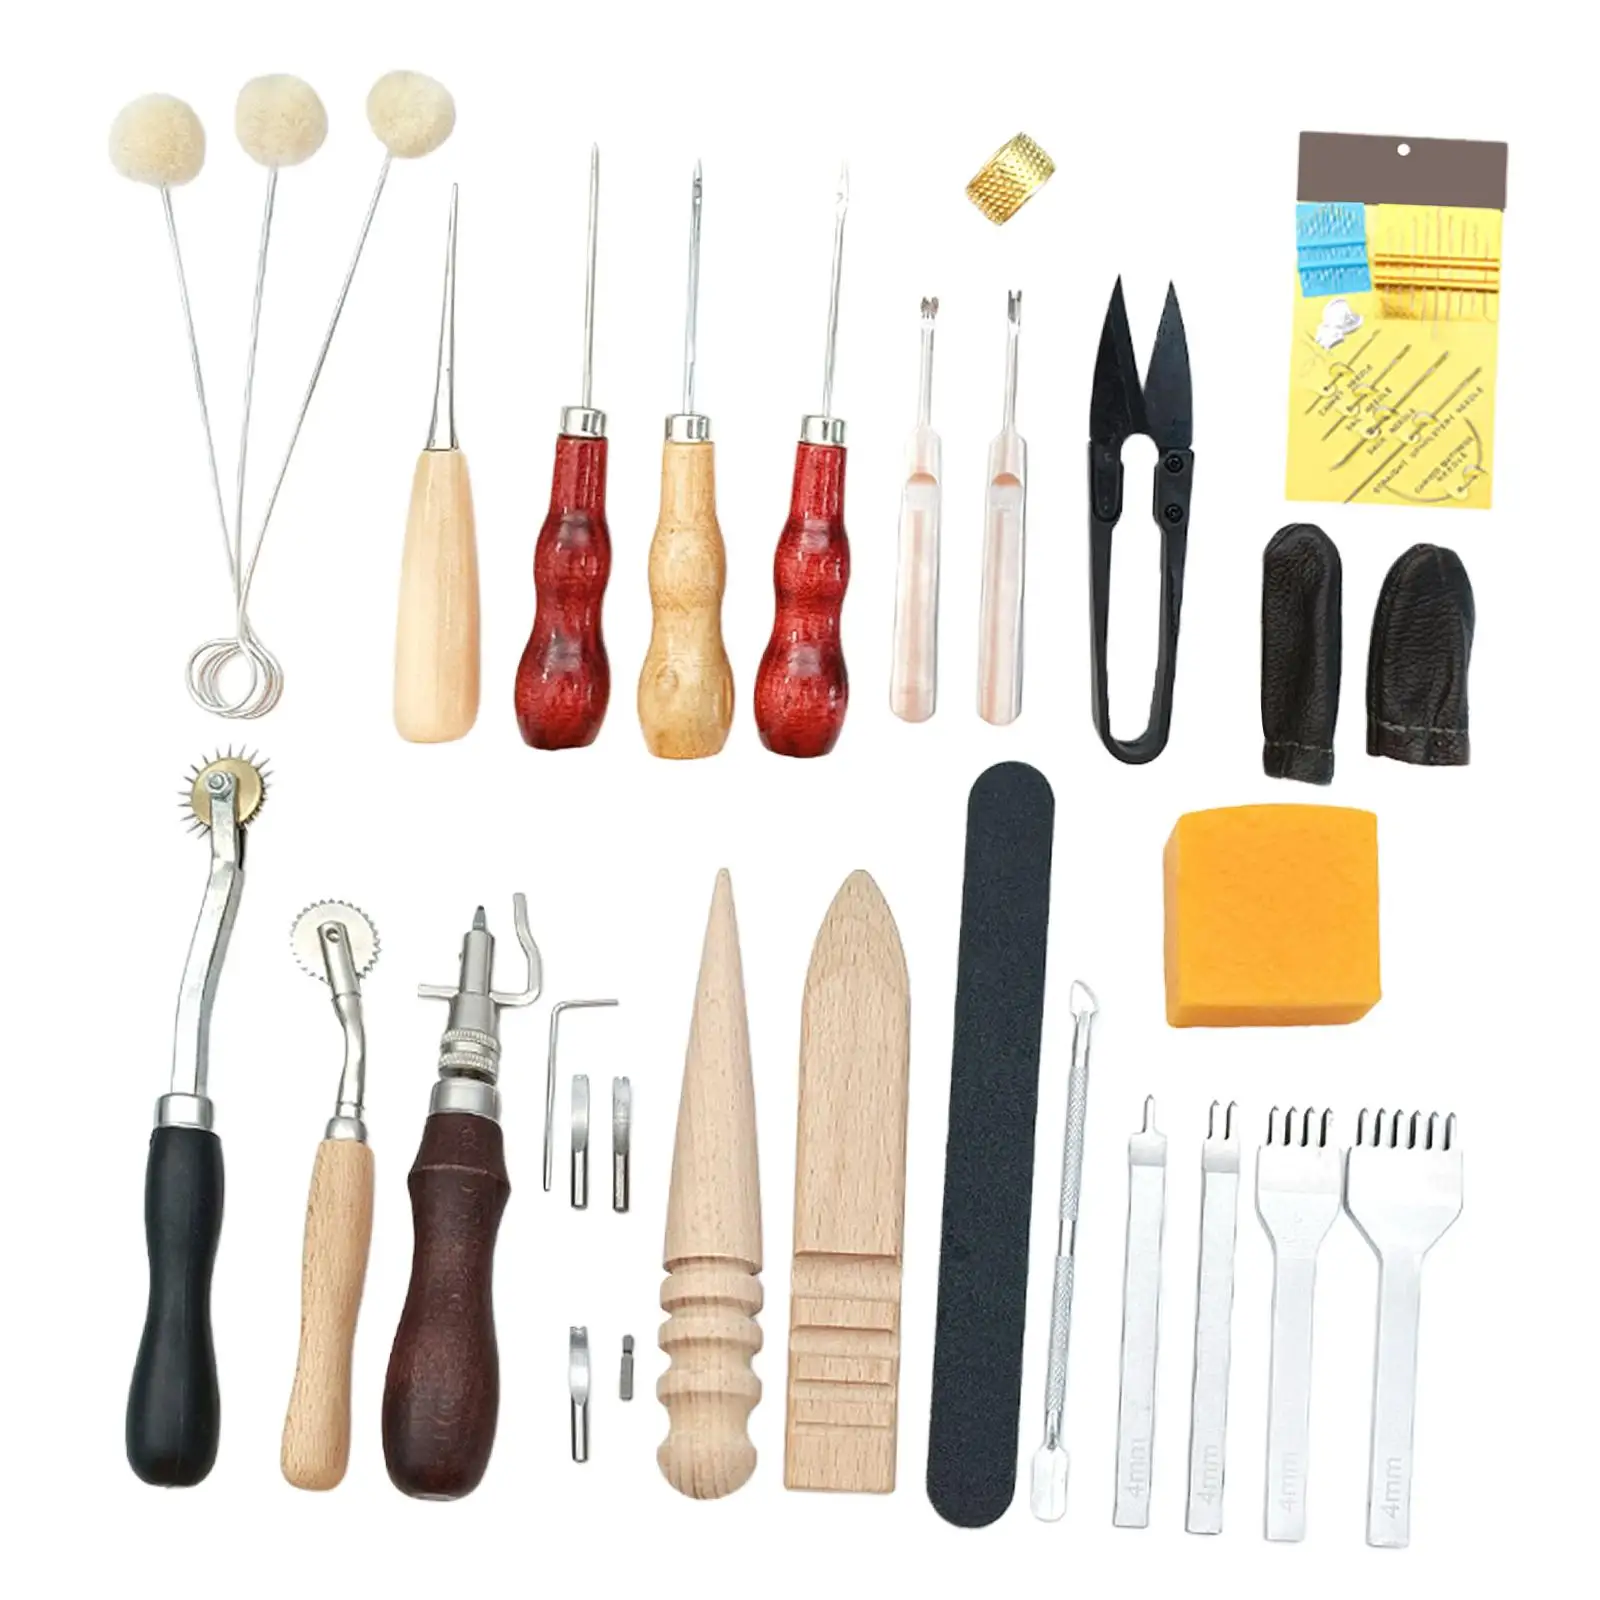 Leathercraft Tool Sets With Hand Sewing Stitching Punch Carving Tools And Other Leather Working Accessories